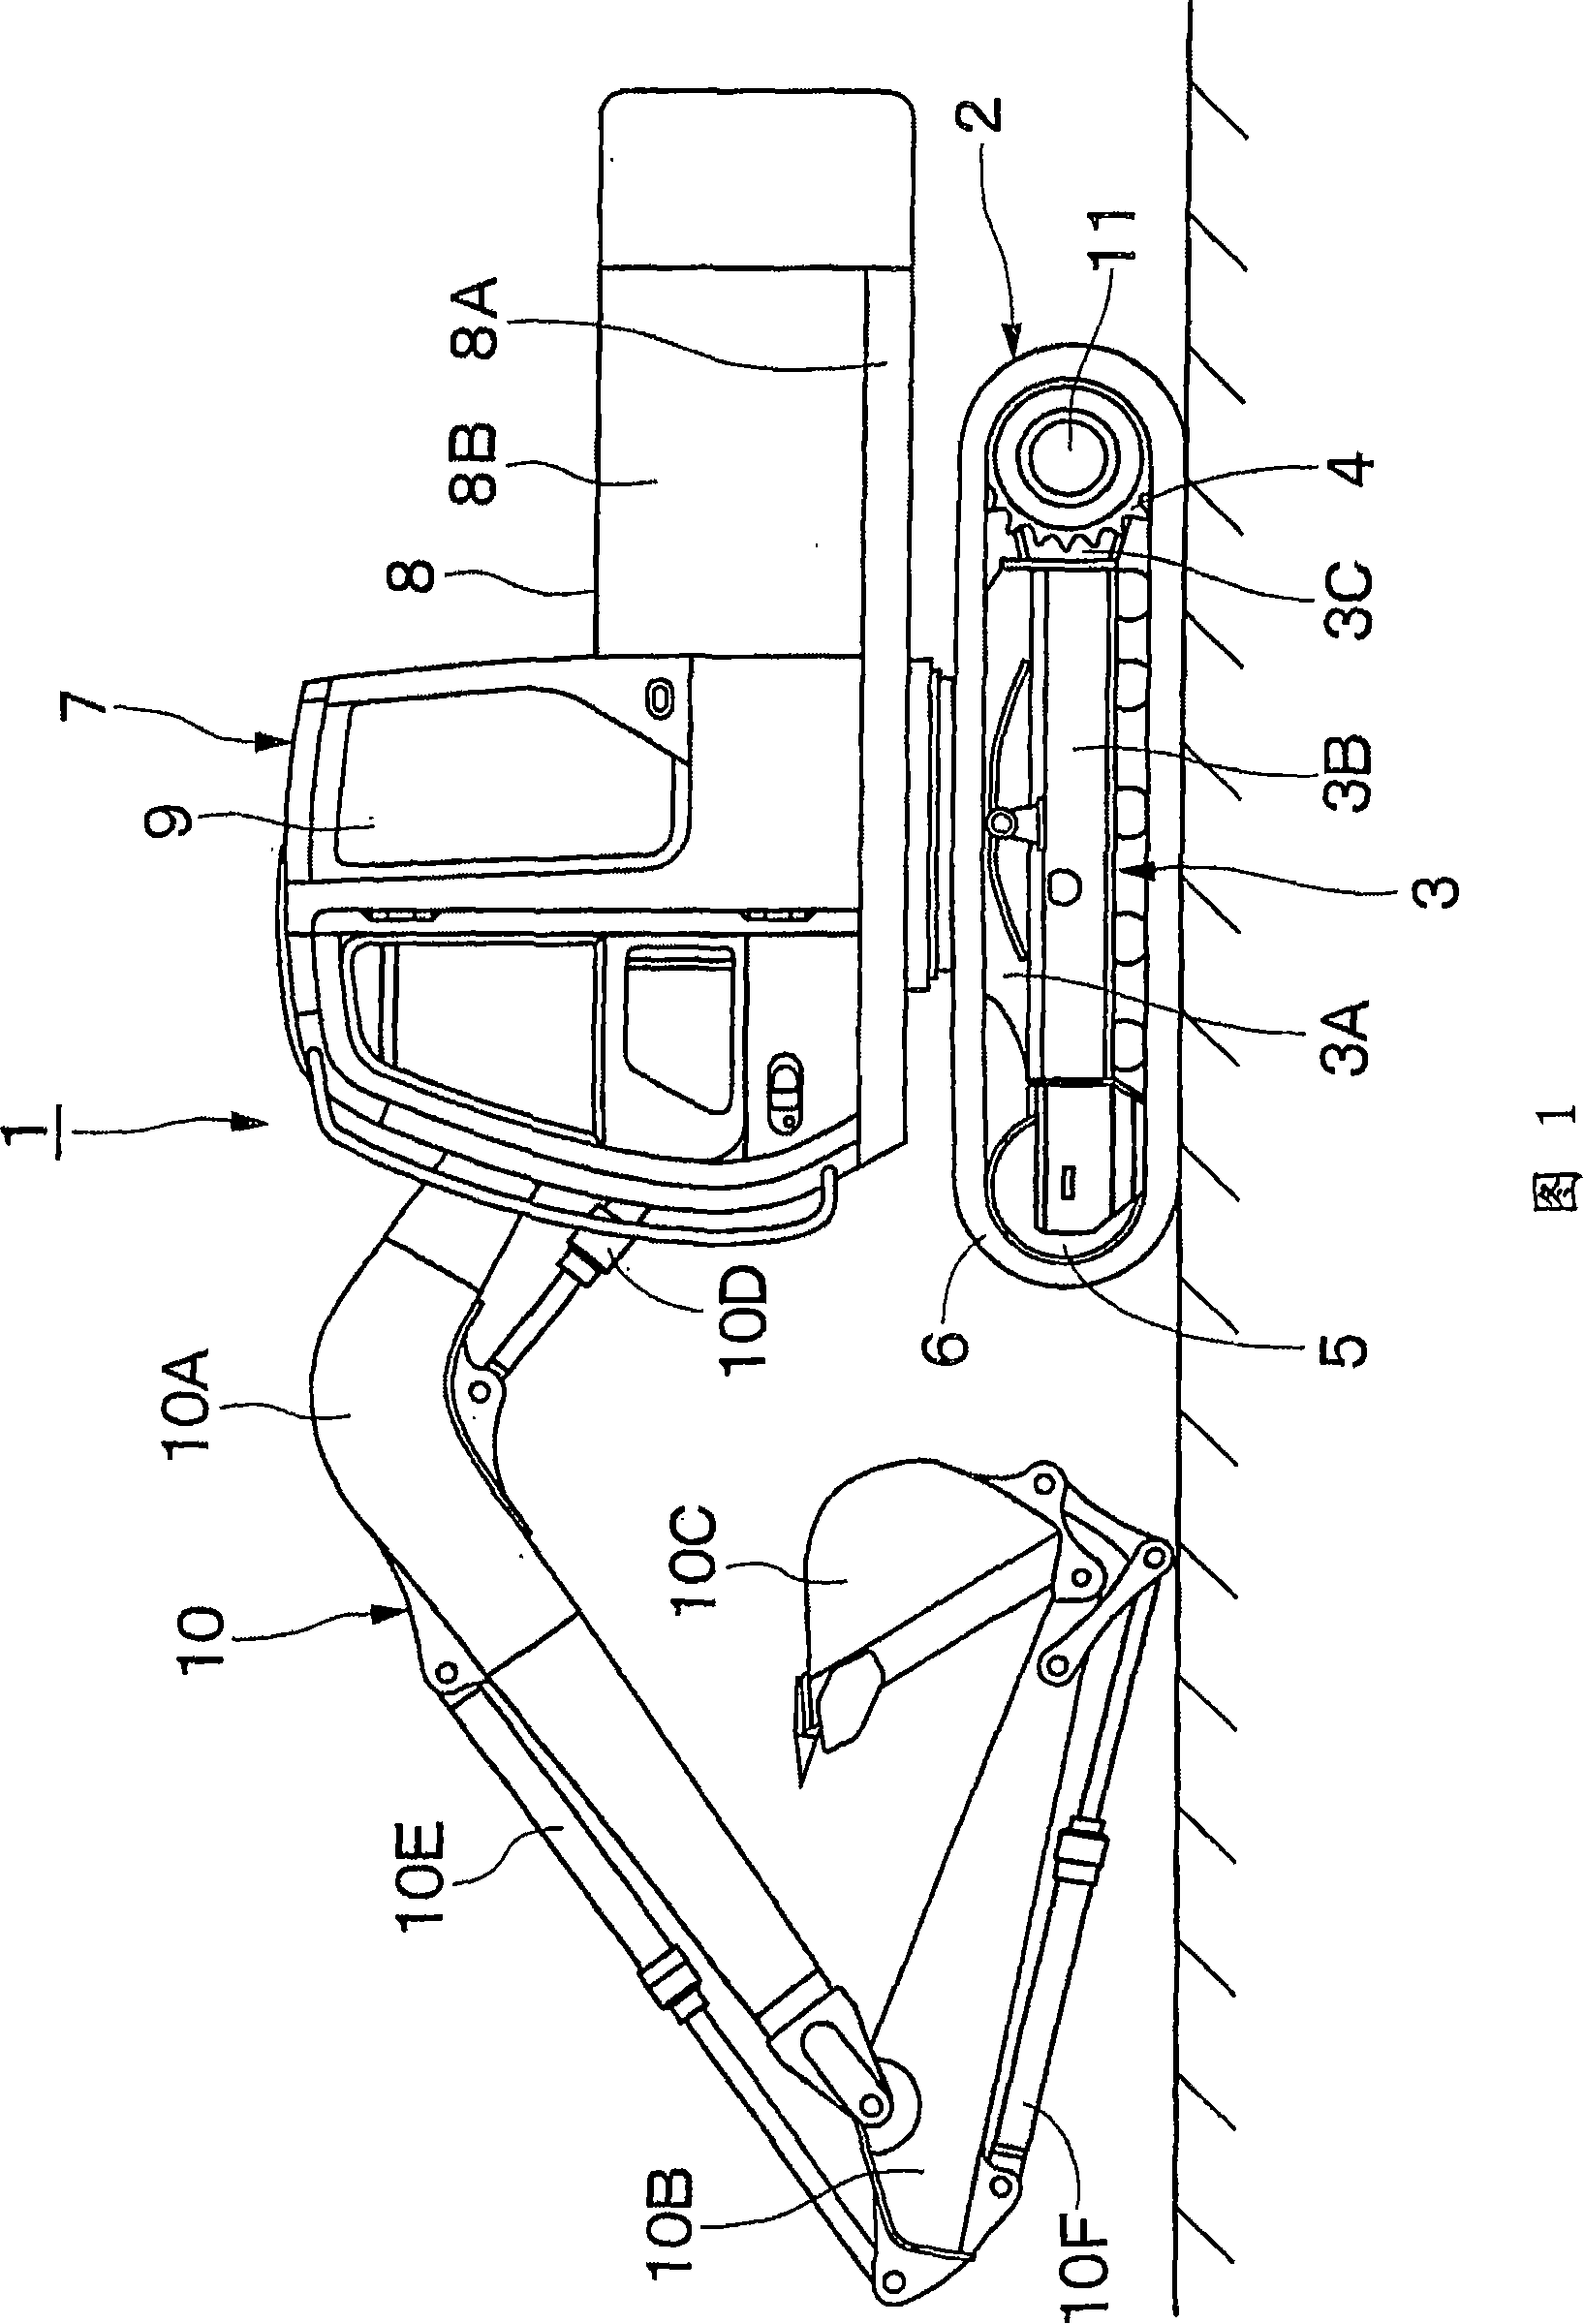 Drum rotation device for construction machine